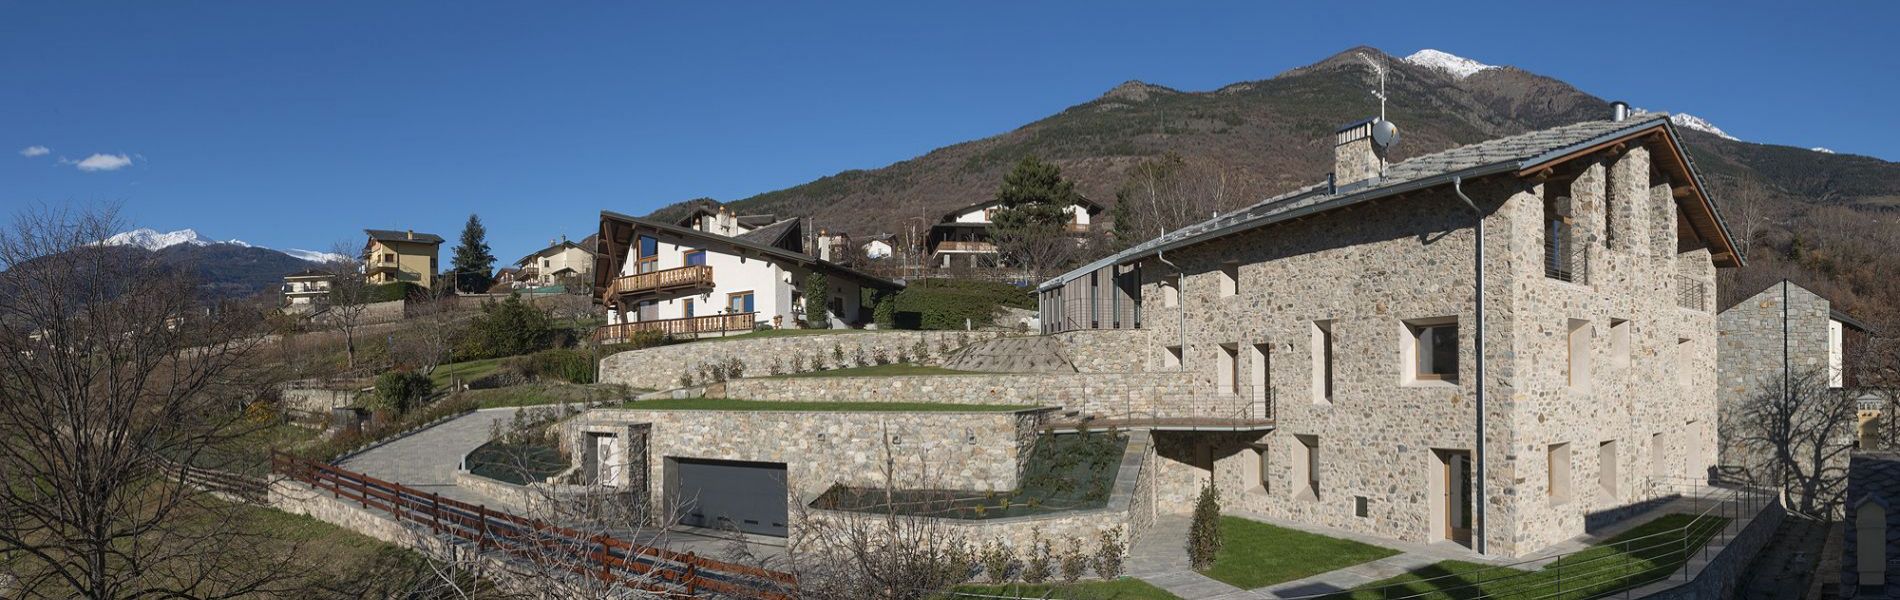 typical aosta valley house